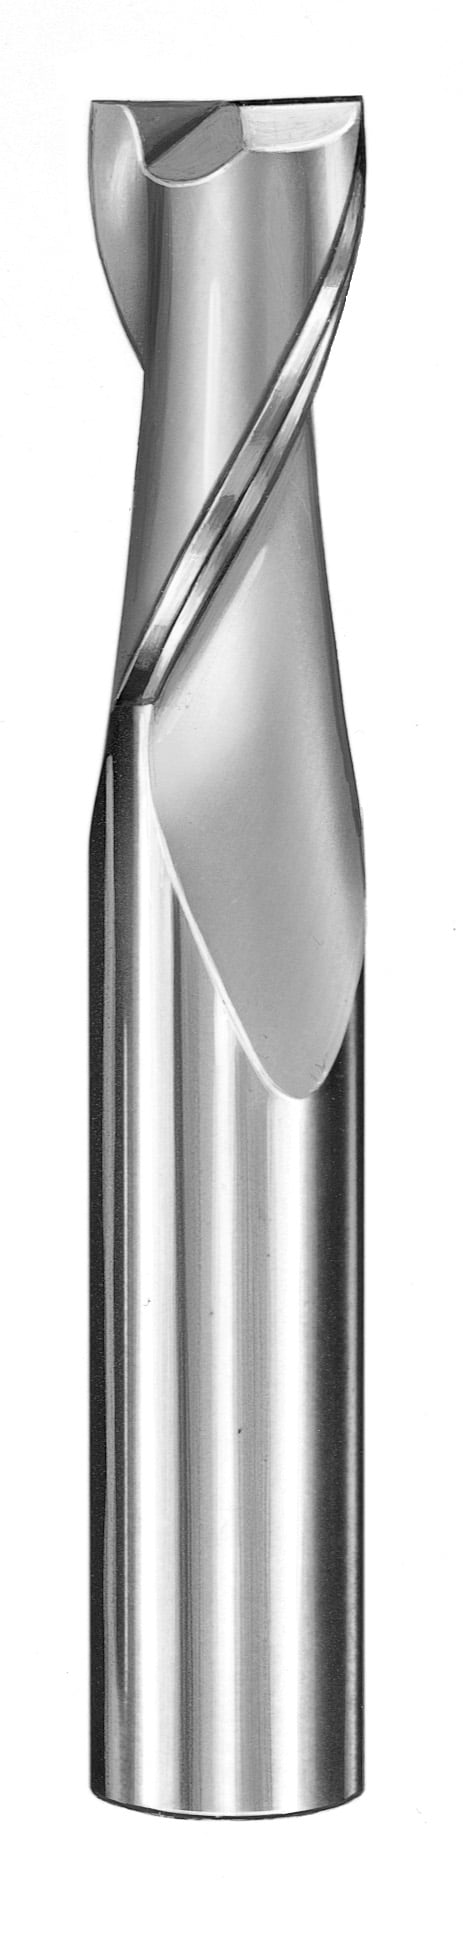 7/8" Dia, 2 Flute, Square End End Mill - 30373